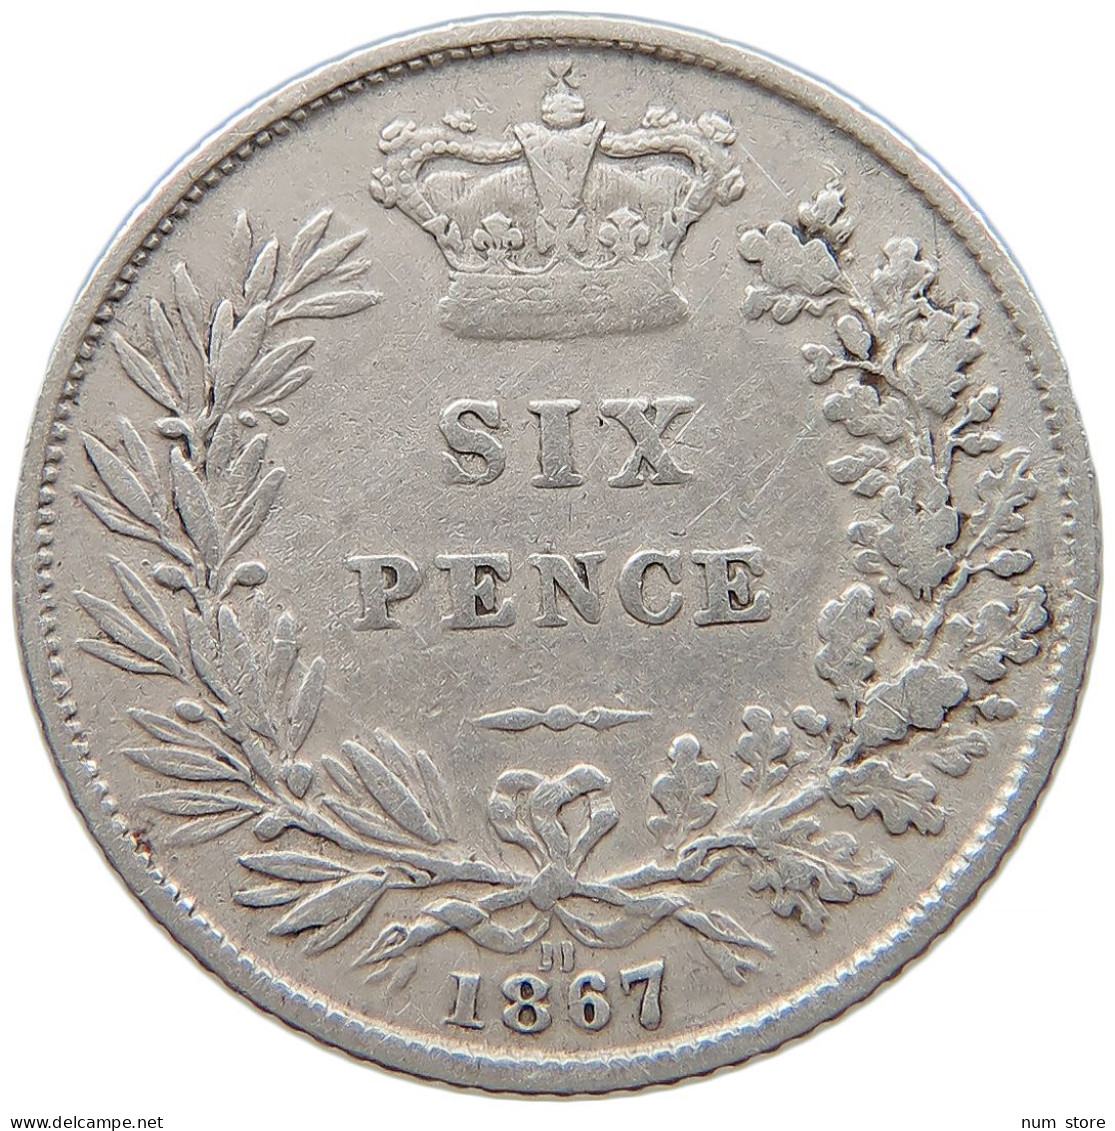 GREAT BRITAIN SIXPENCE 1867 Victoria 1837-1901 #t022 0603 - H. 6 Pence